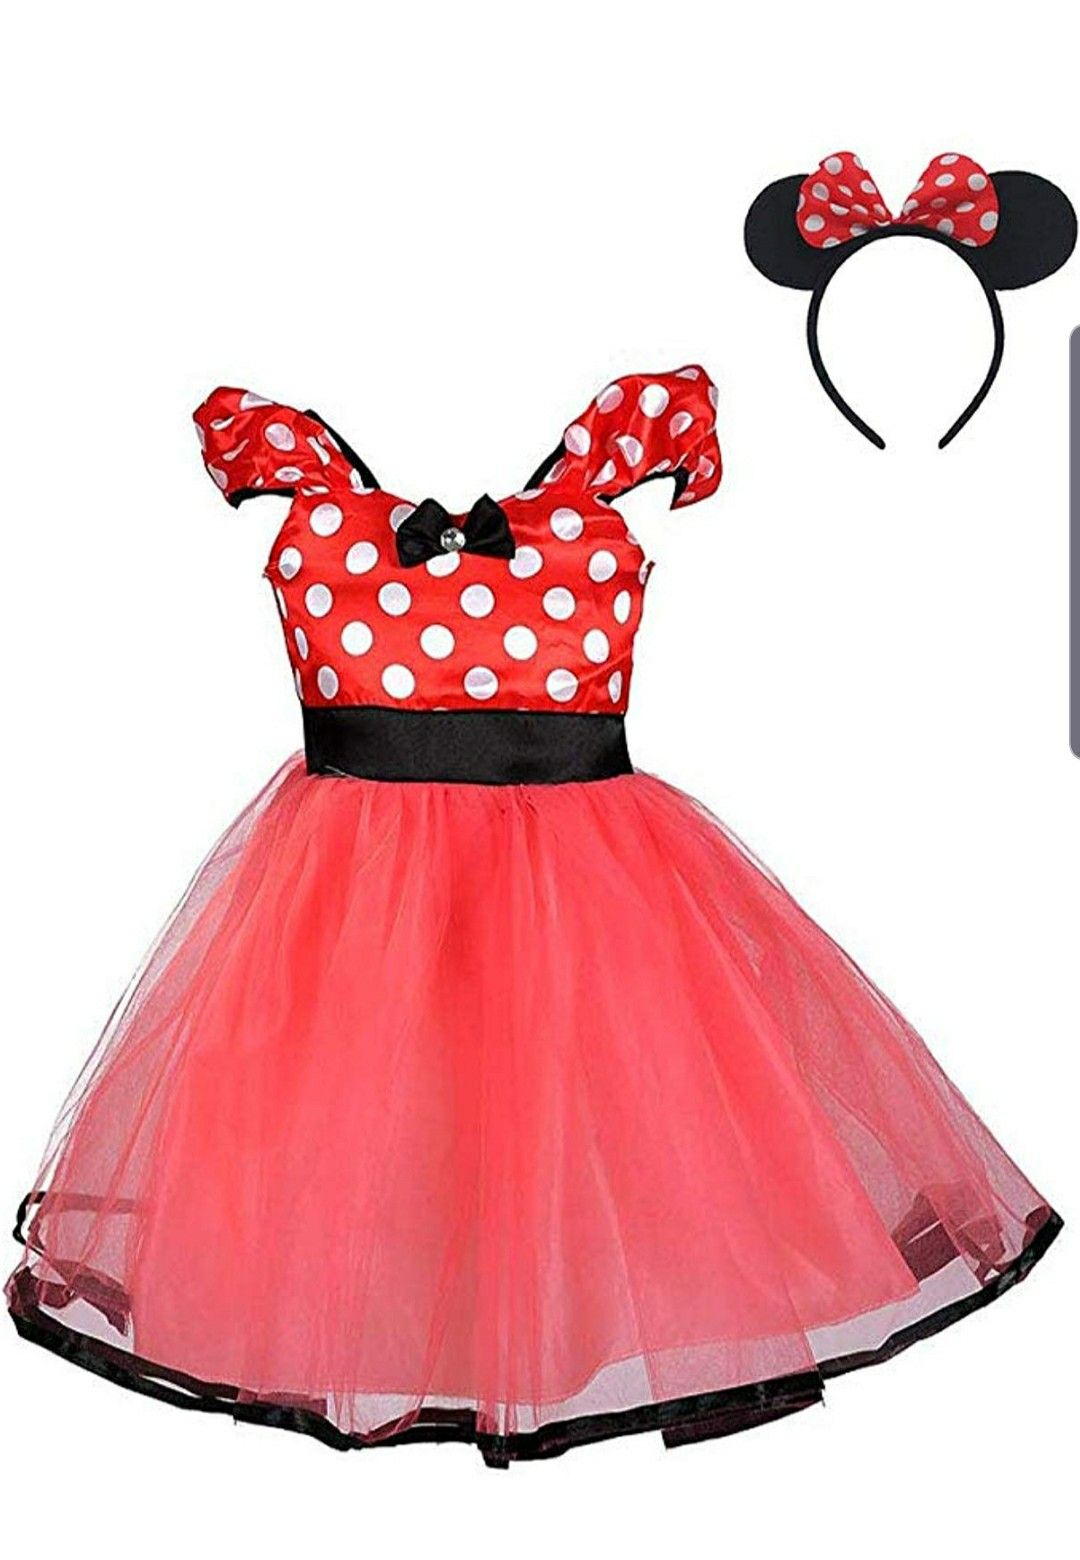 Toddler minnie mouse dress and ears